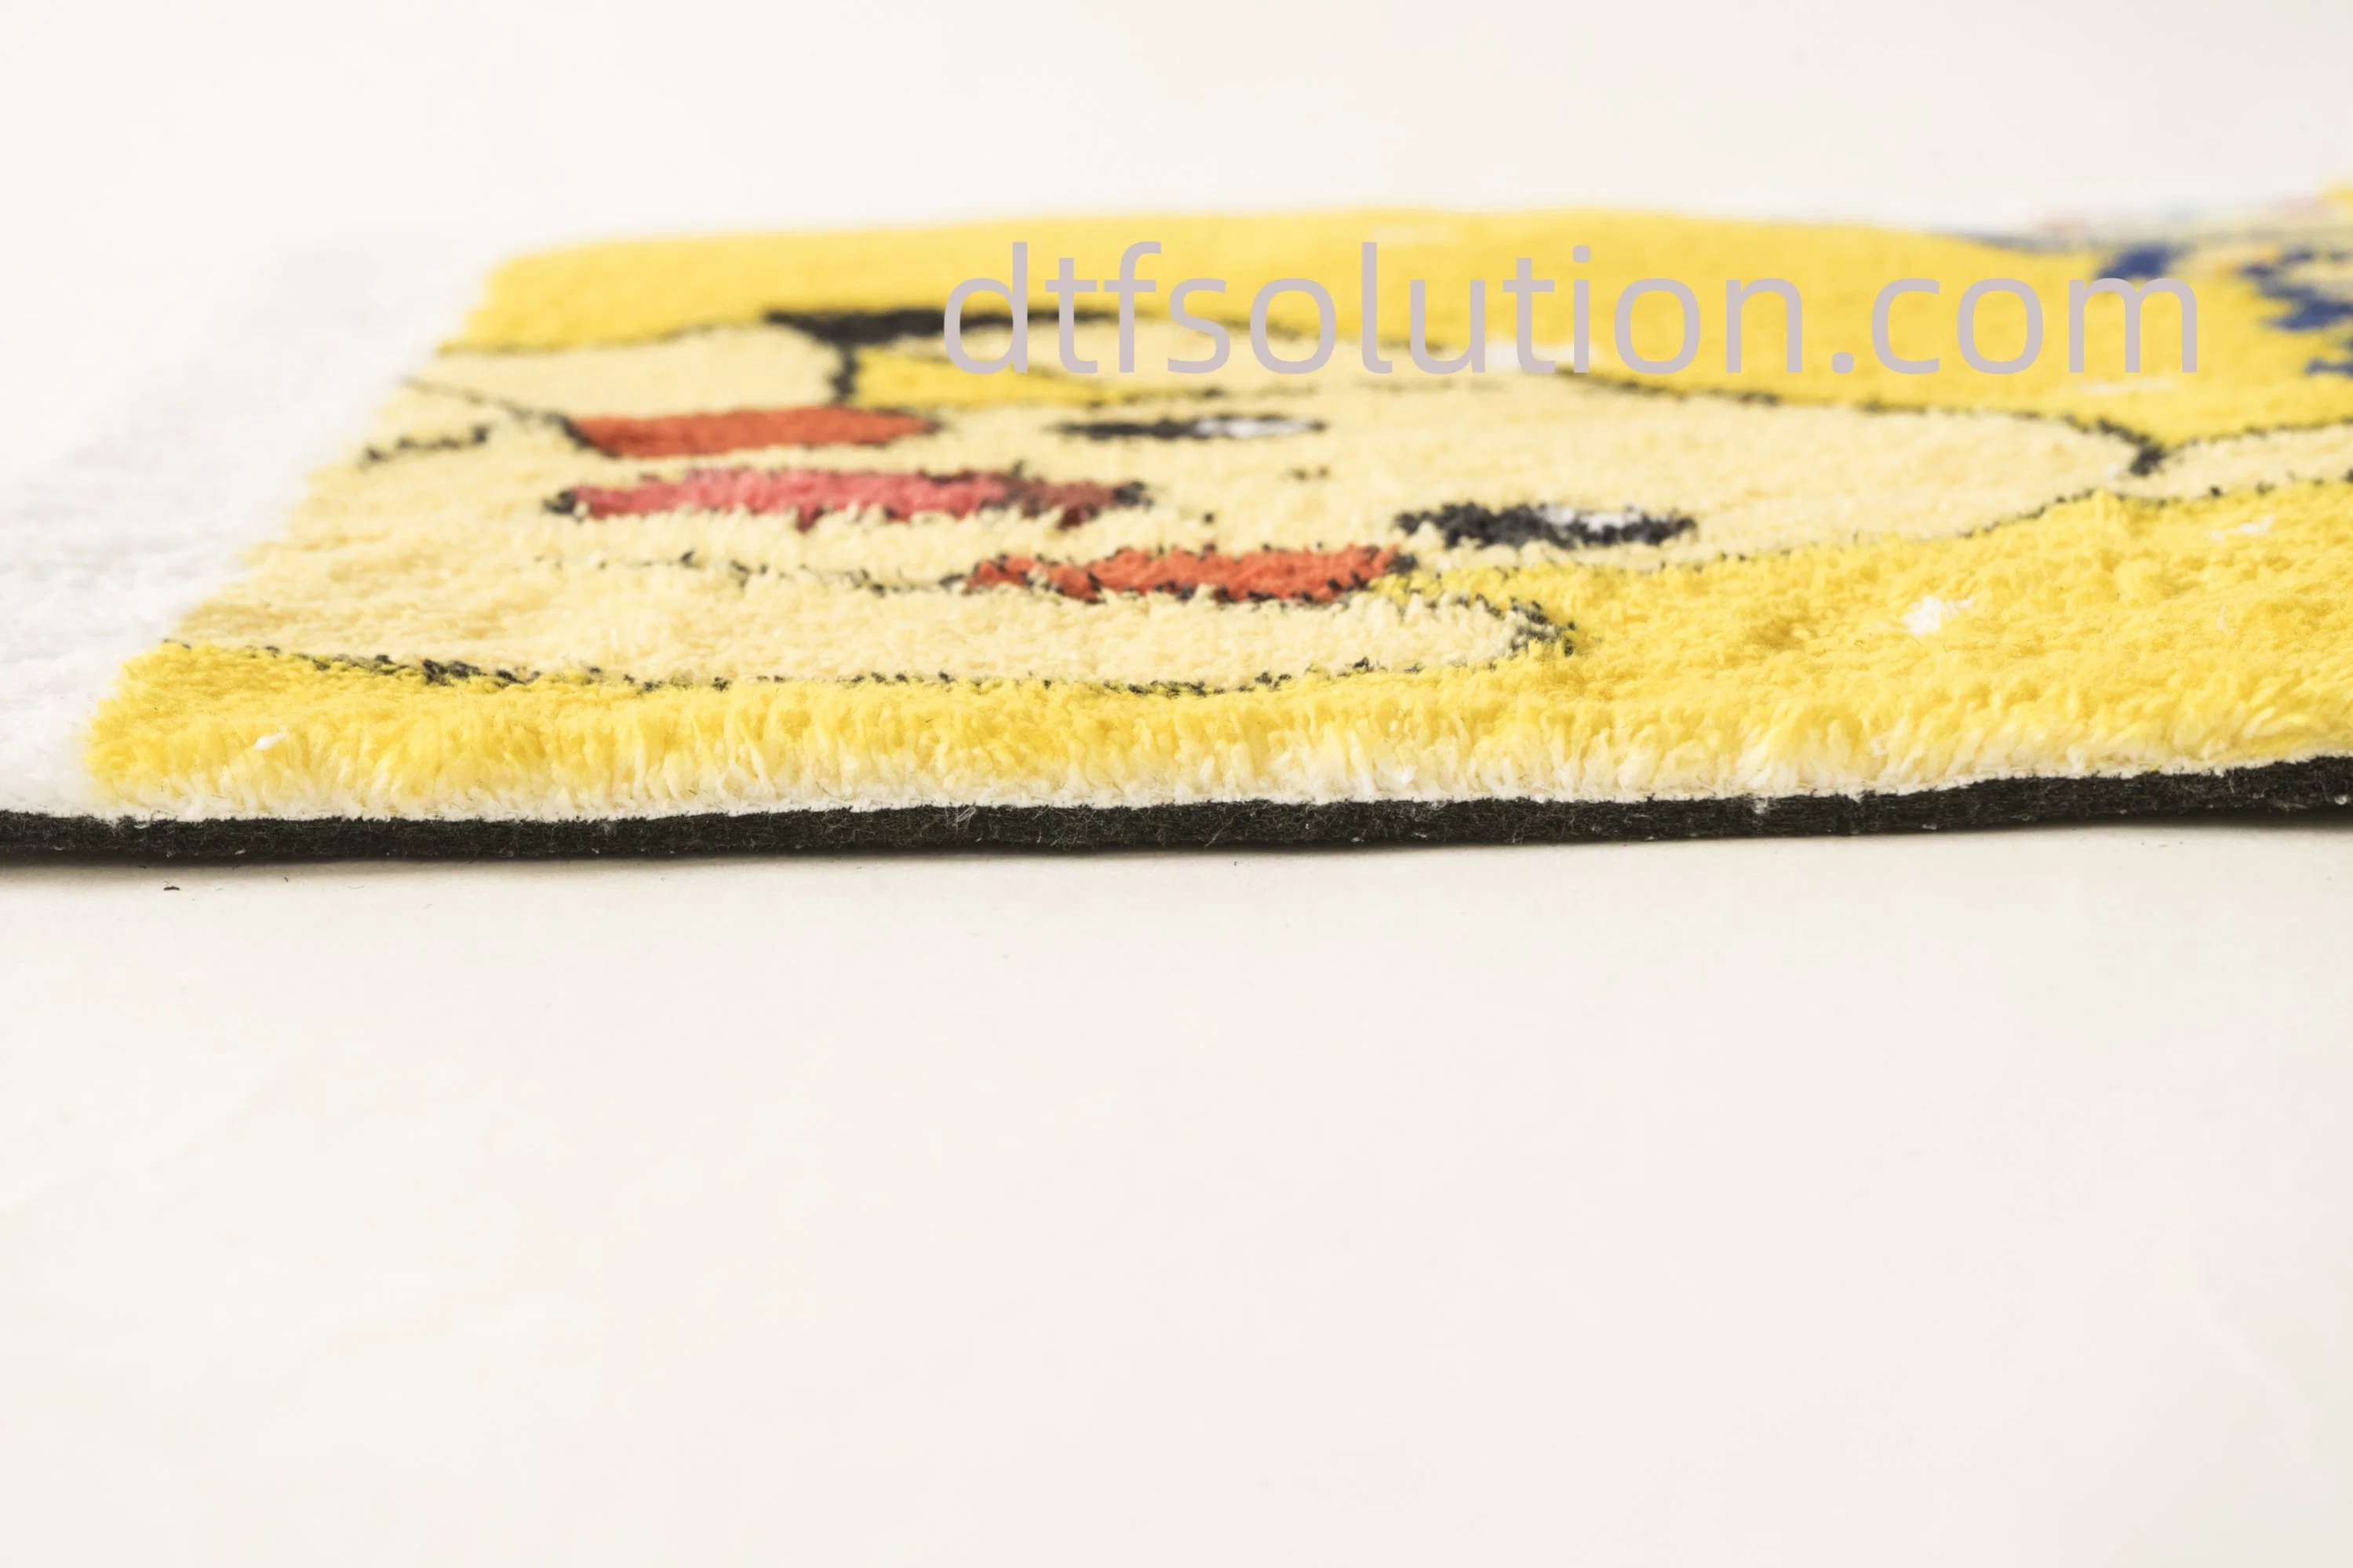 Carpet Ink Sublimation Using Sublimation Printer and High Concentration Ink